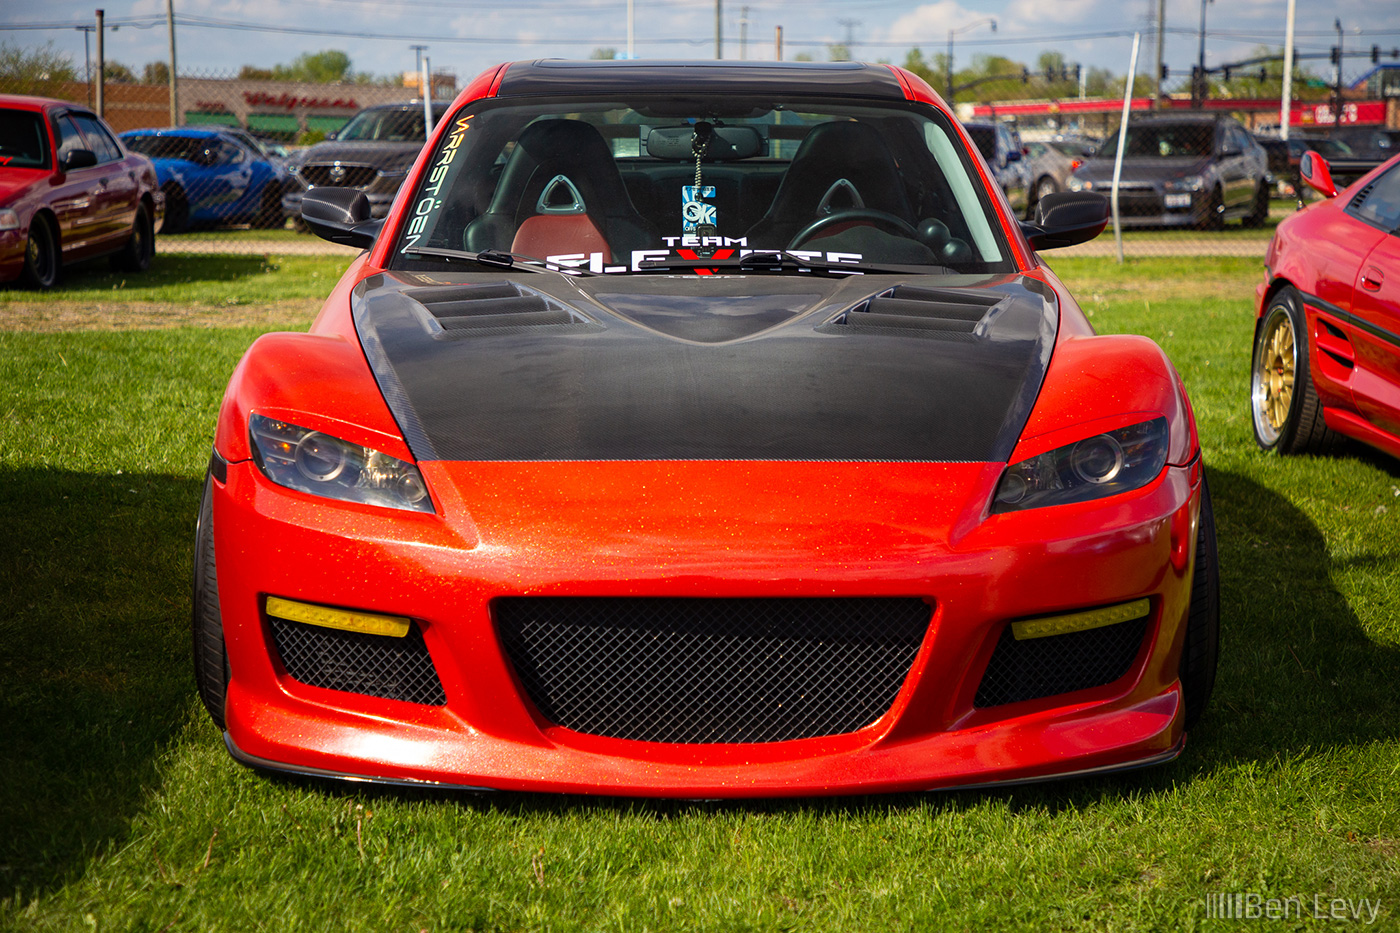 Front of Mazda RX-8 at Import Face Off